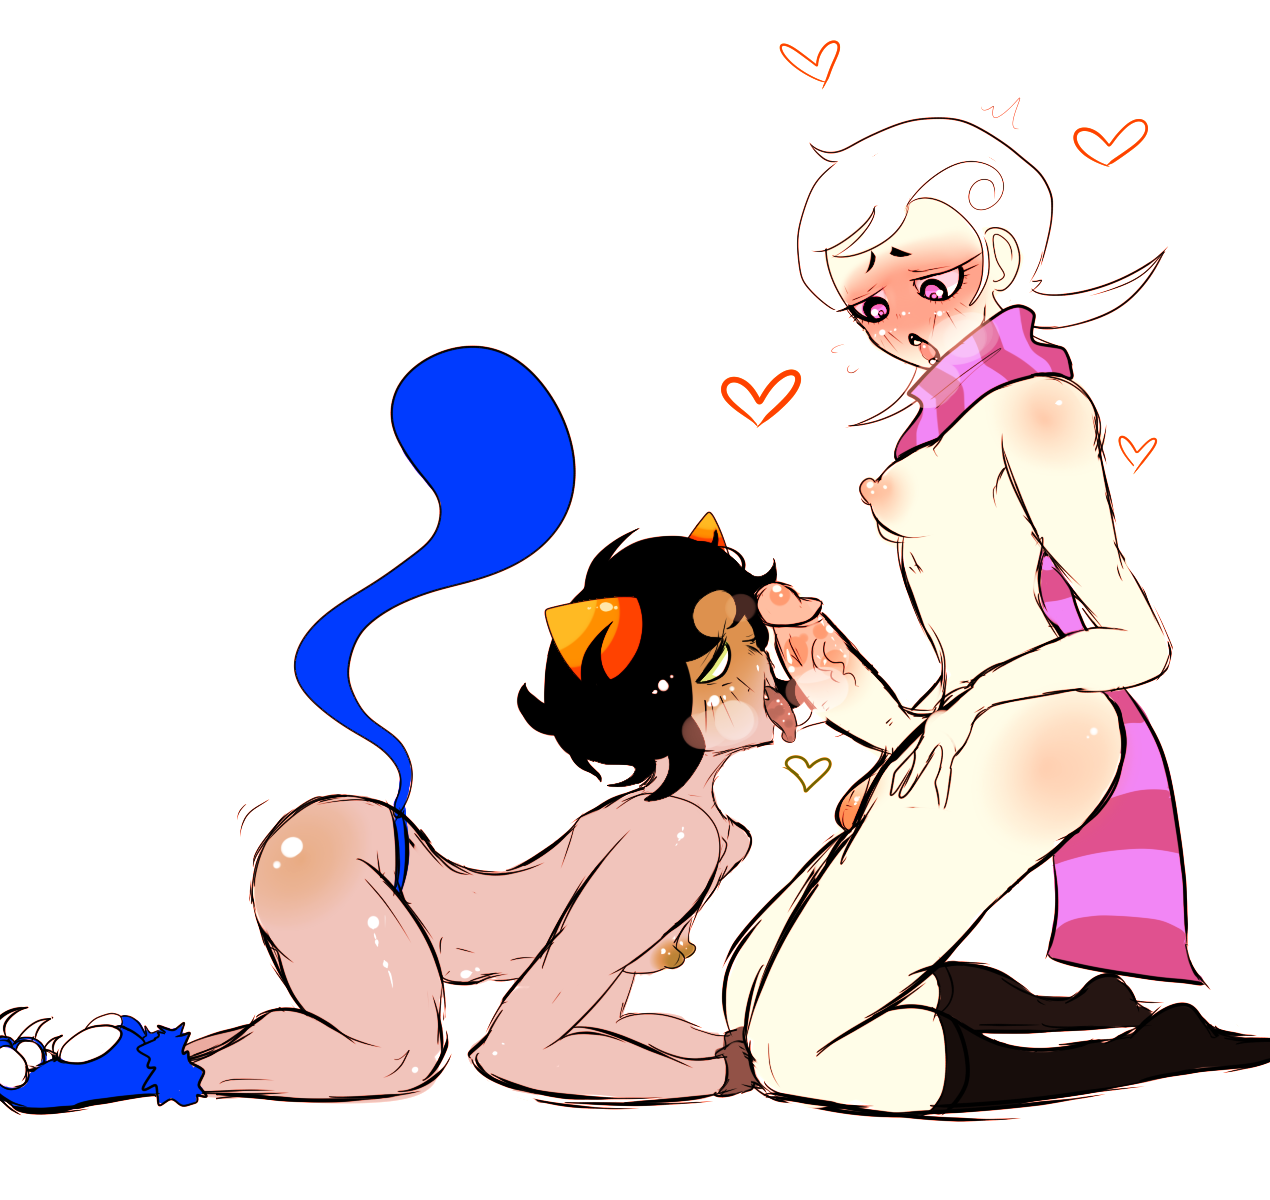 Homestuck futanari porn as requested, there’s gonna be plenty. 